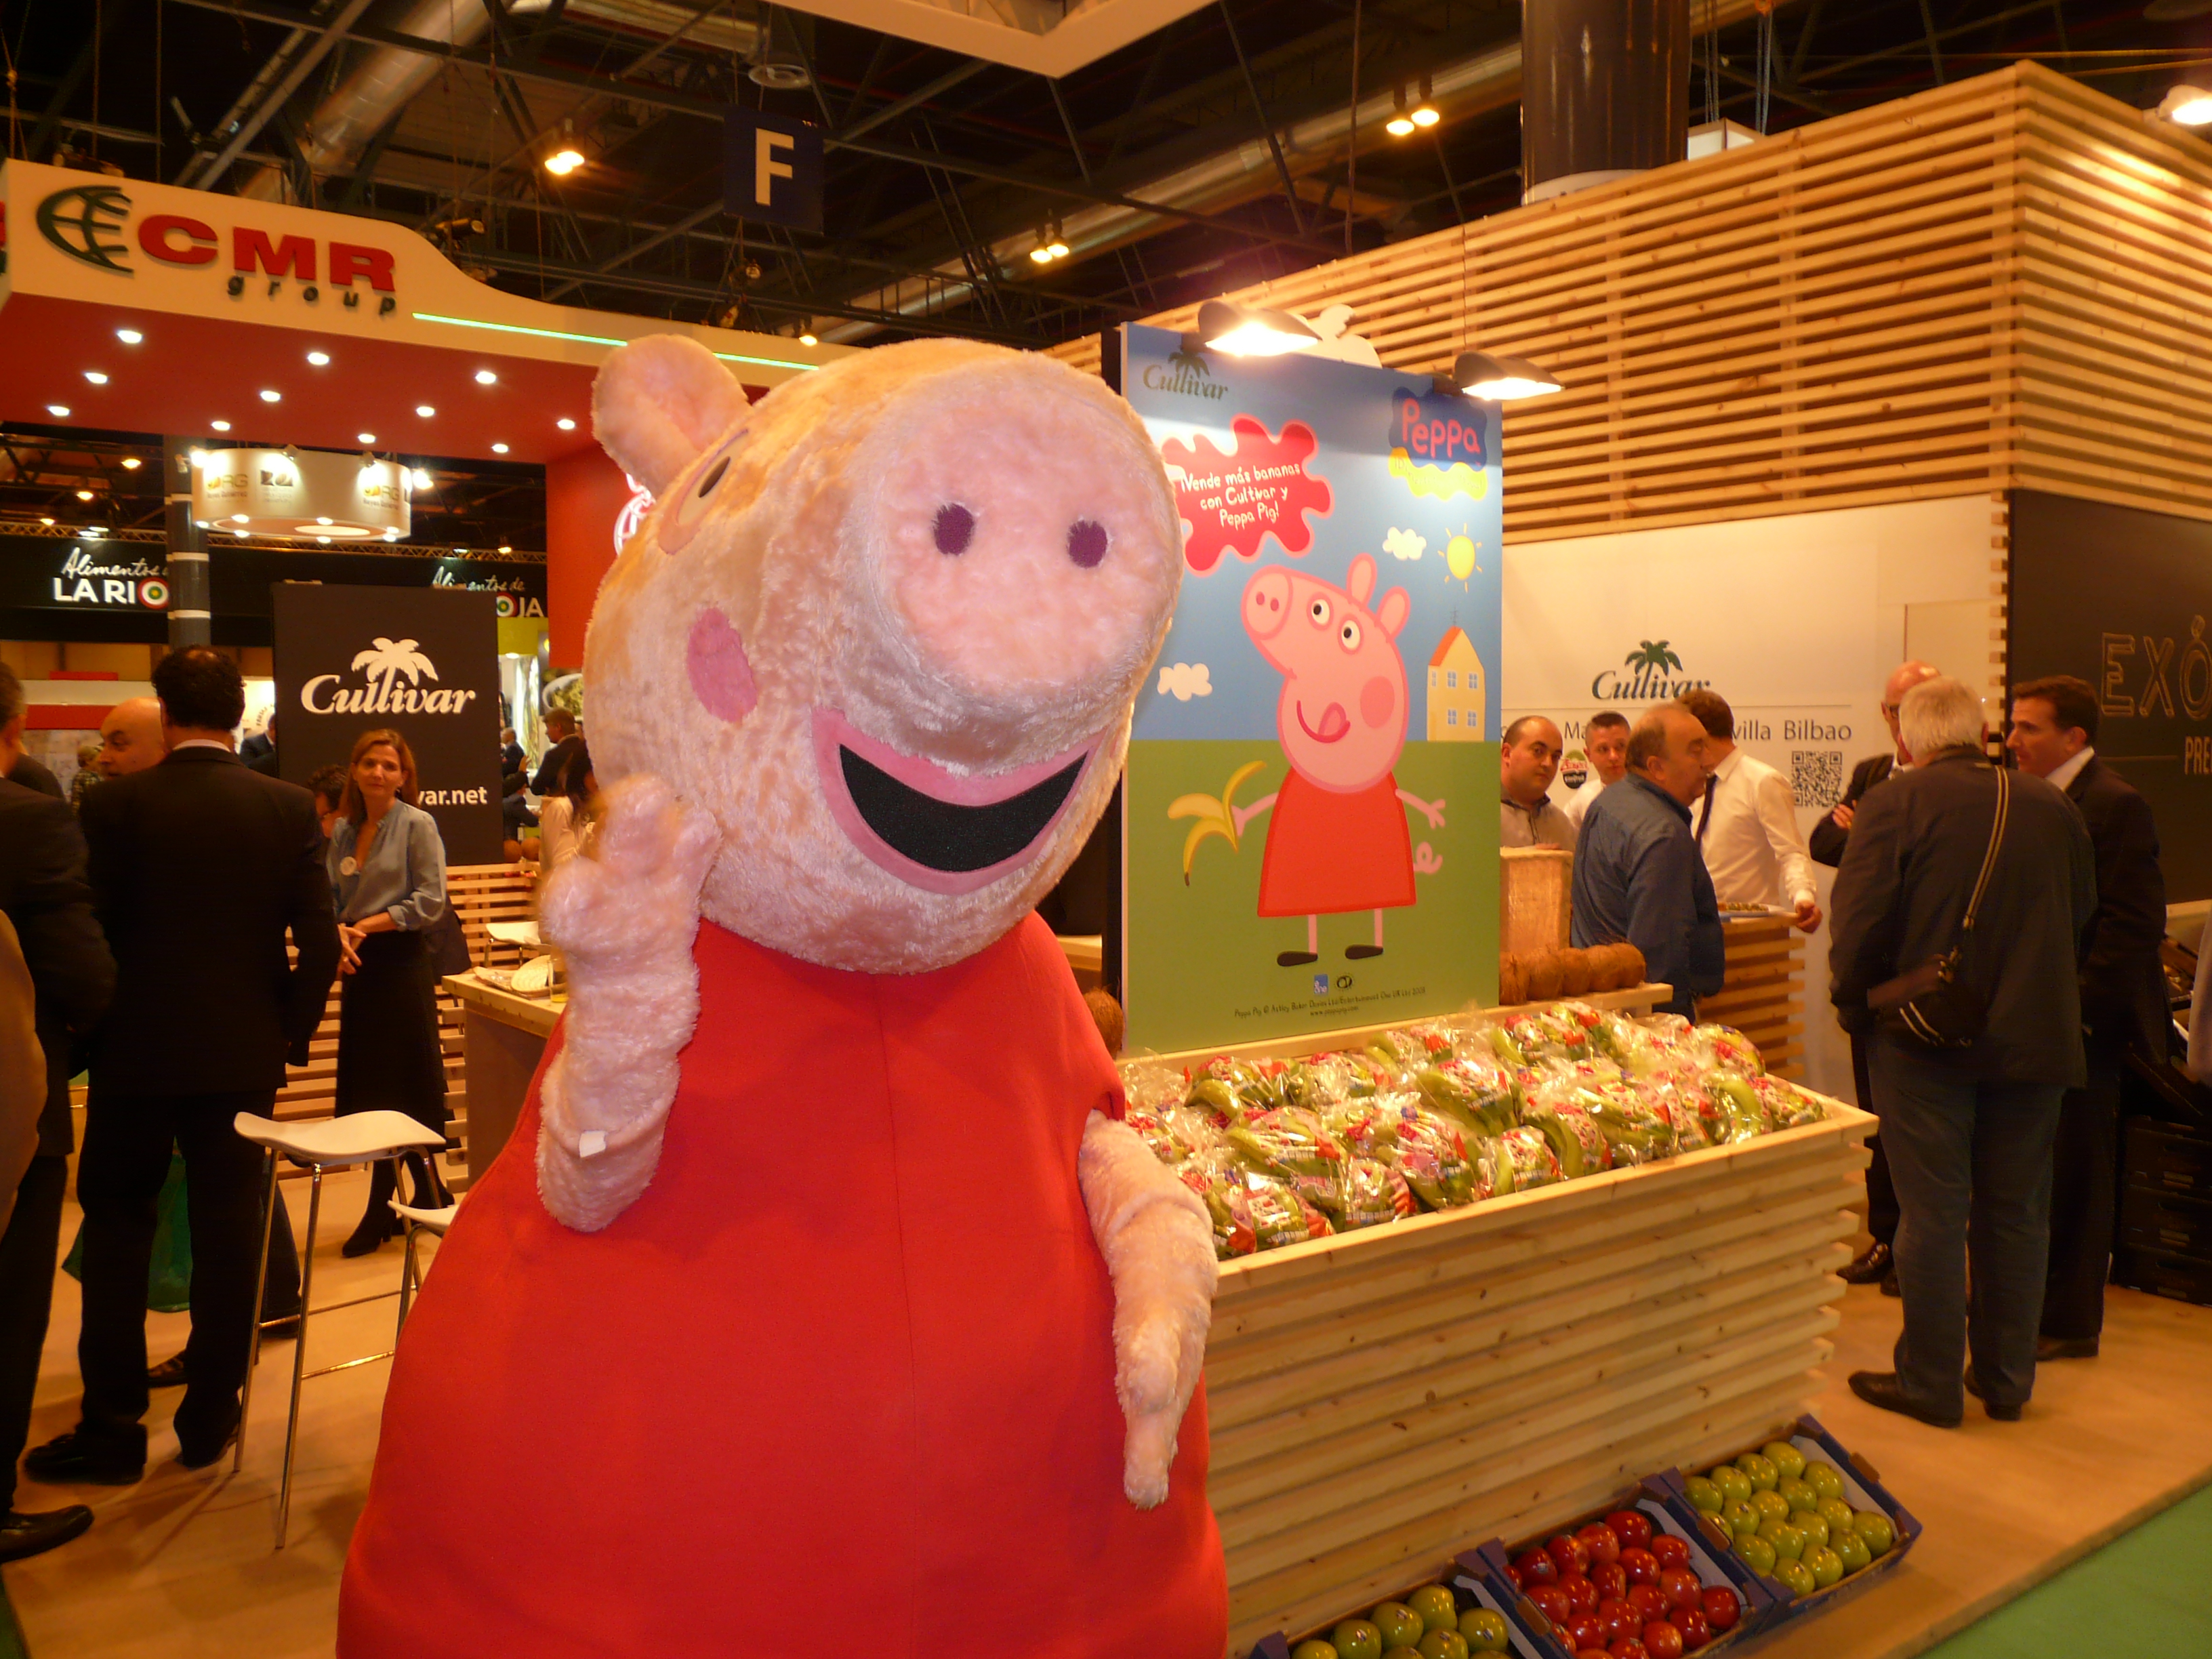 Peppa Pig makes an appearance